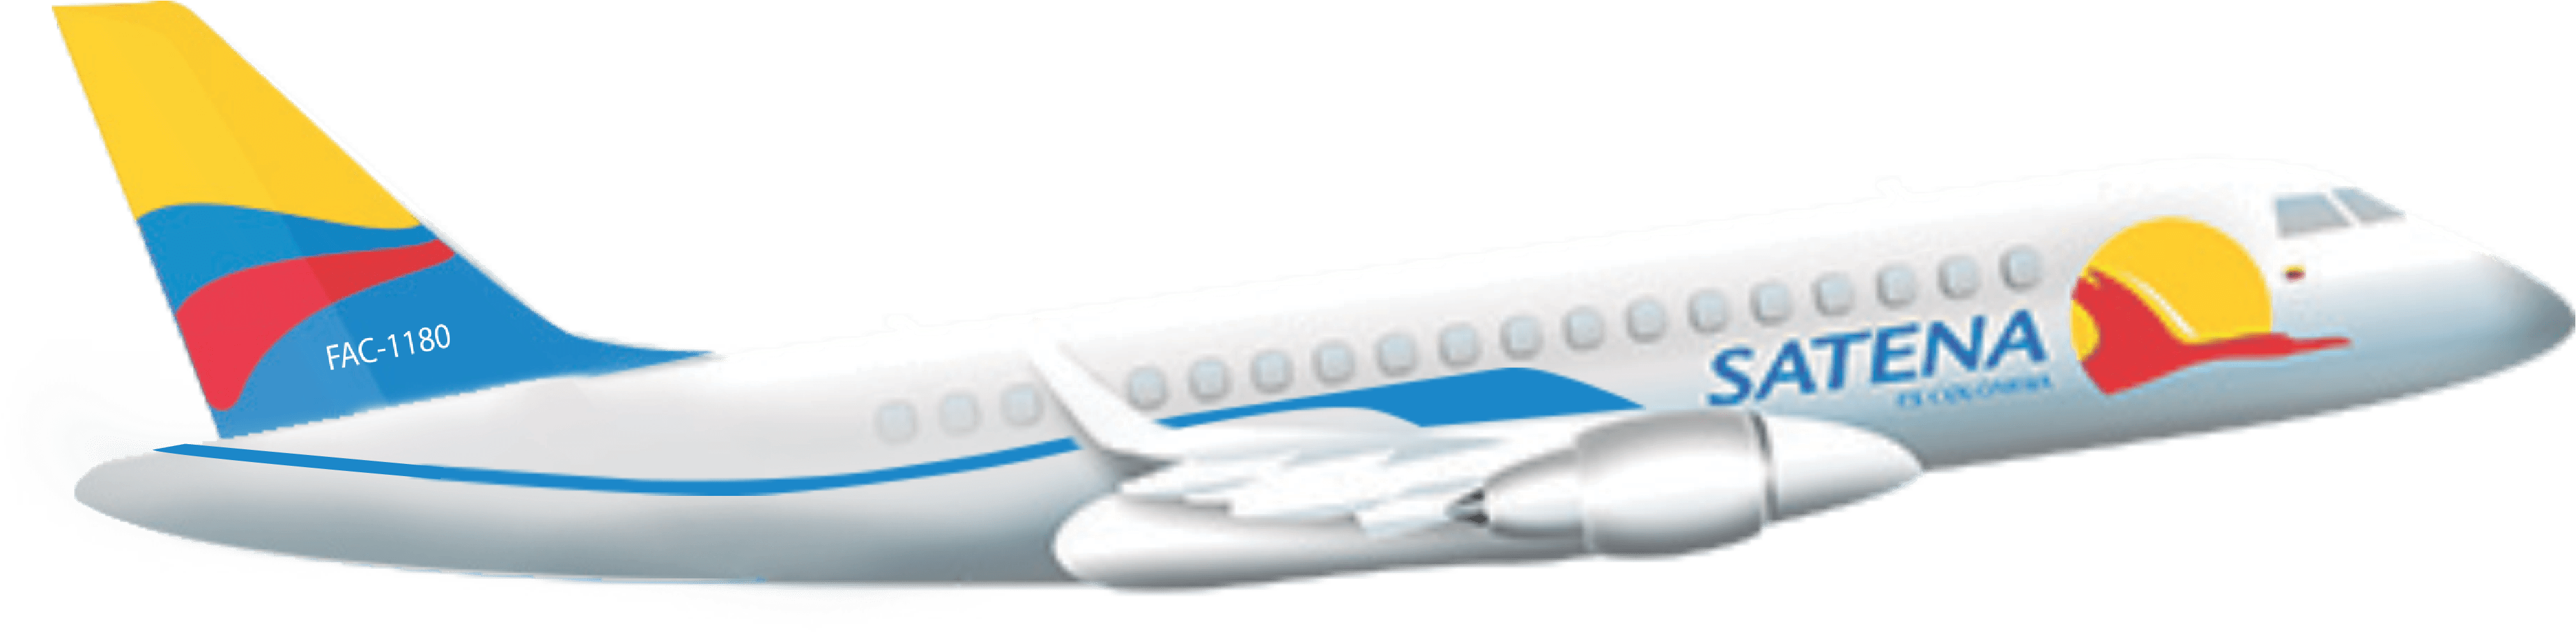 Satena Airlines Aircraft Side View PNG